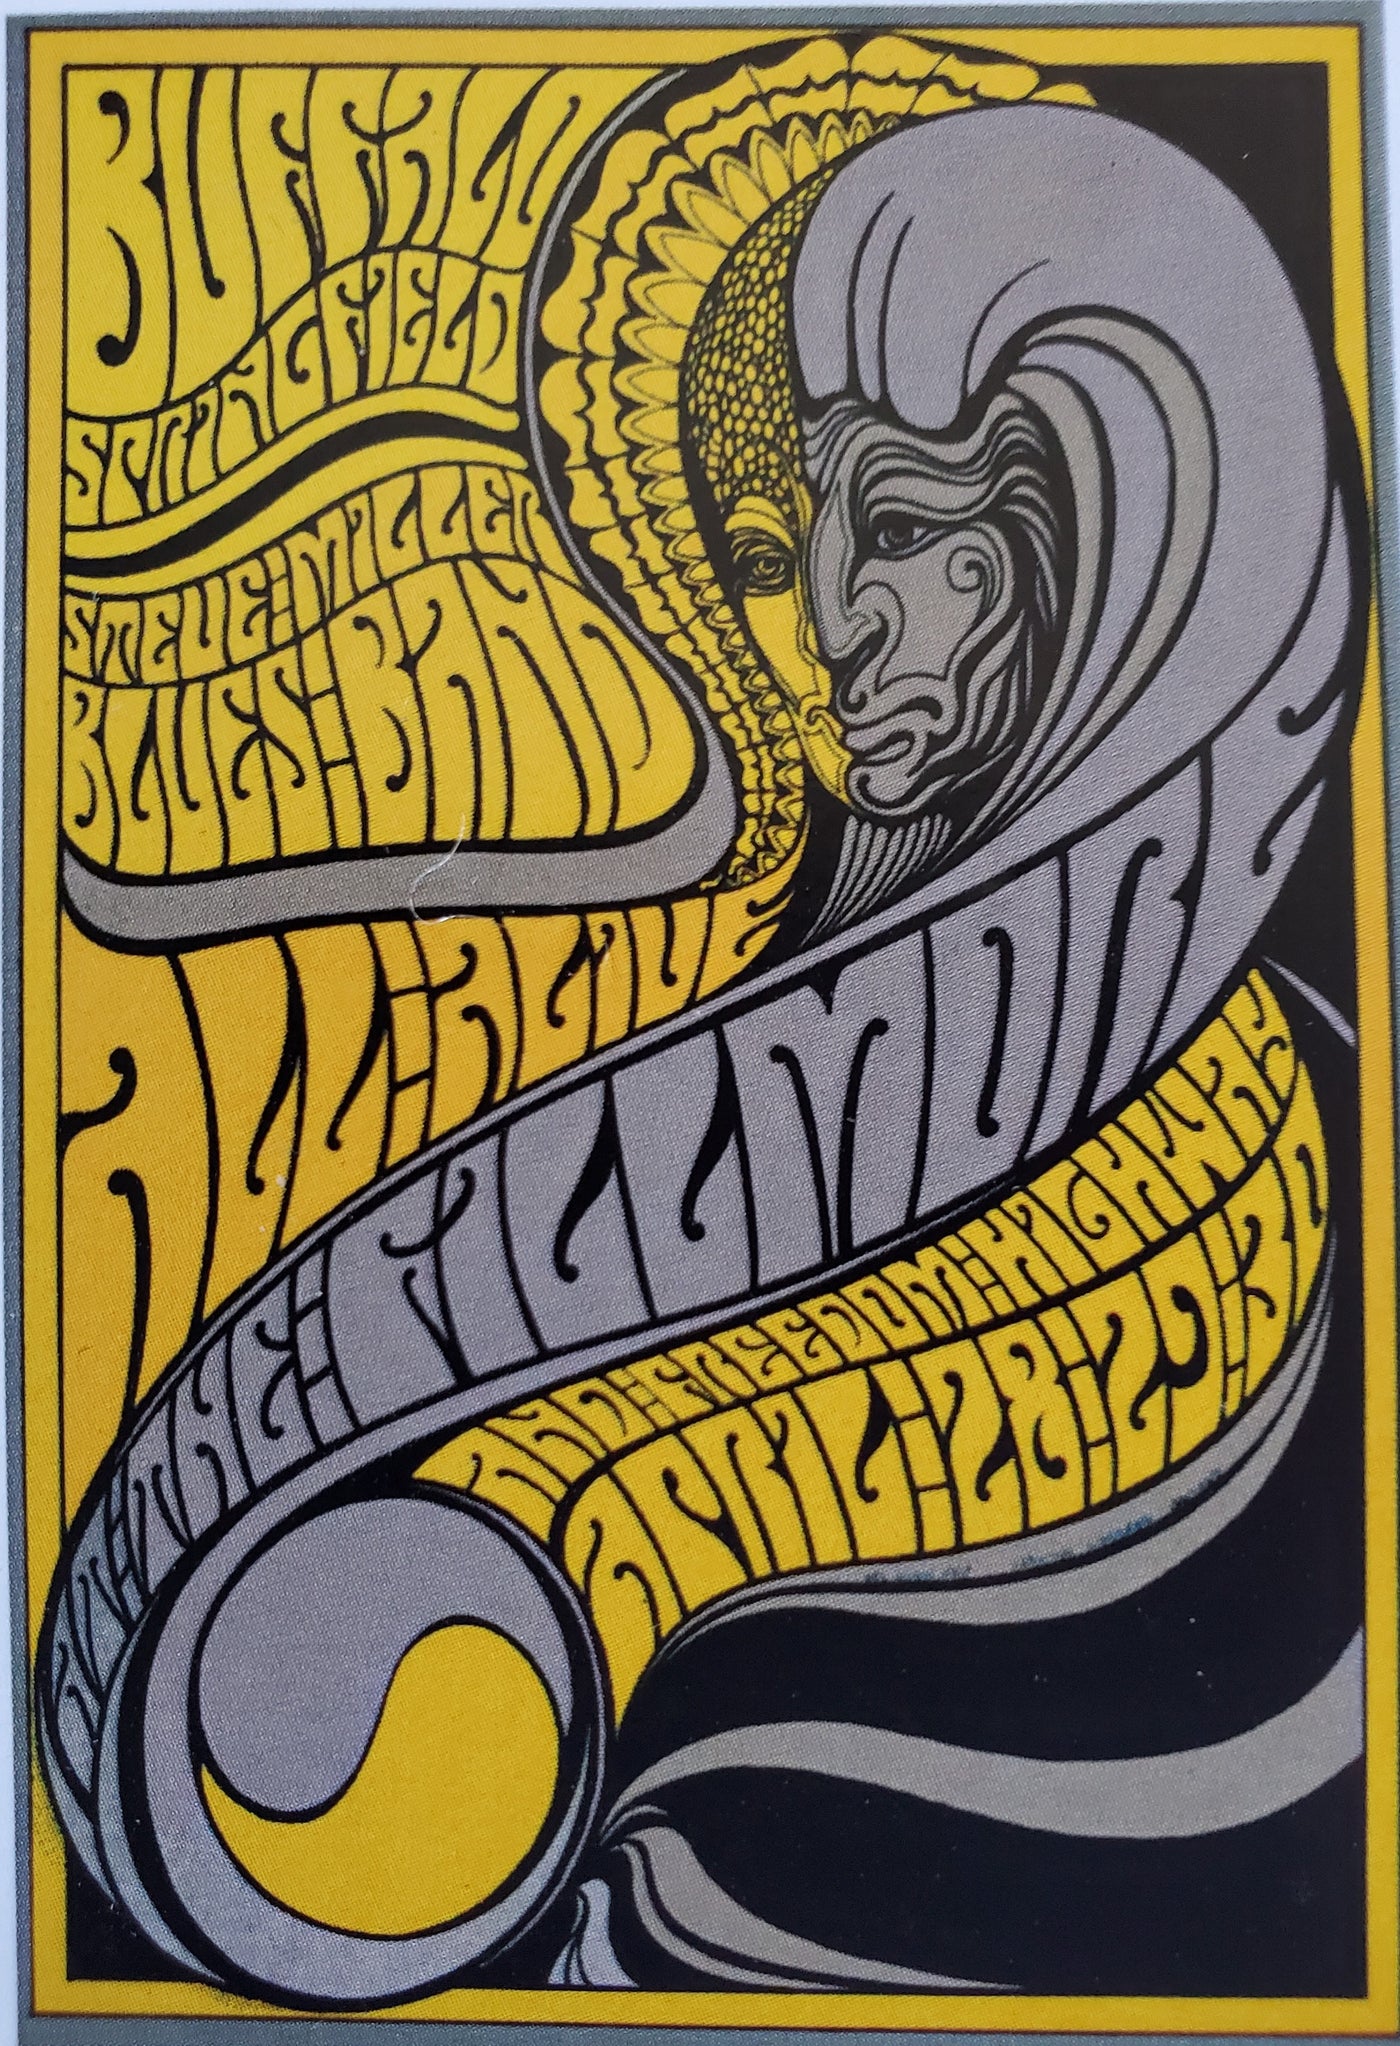 Afterthought Poster 275 Buffalo Springfield/Steve Miller Band